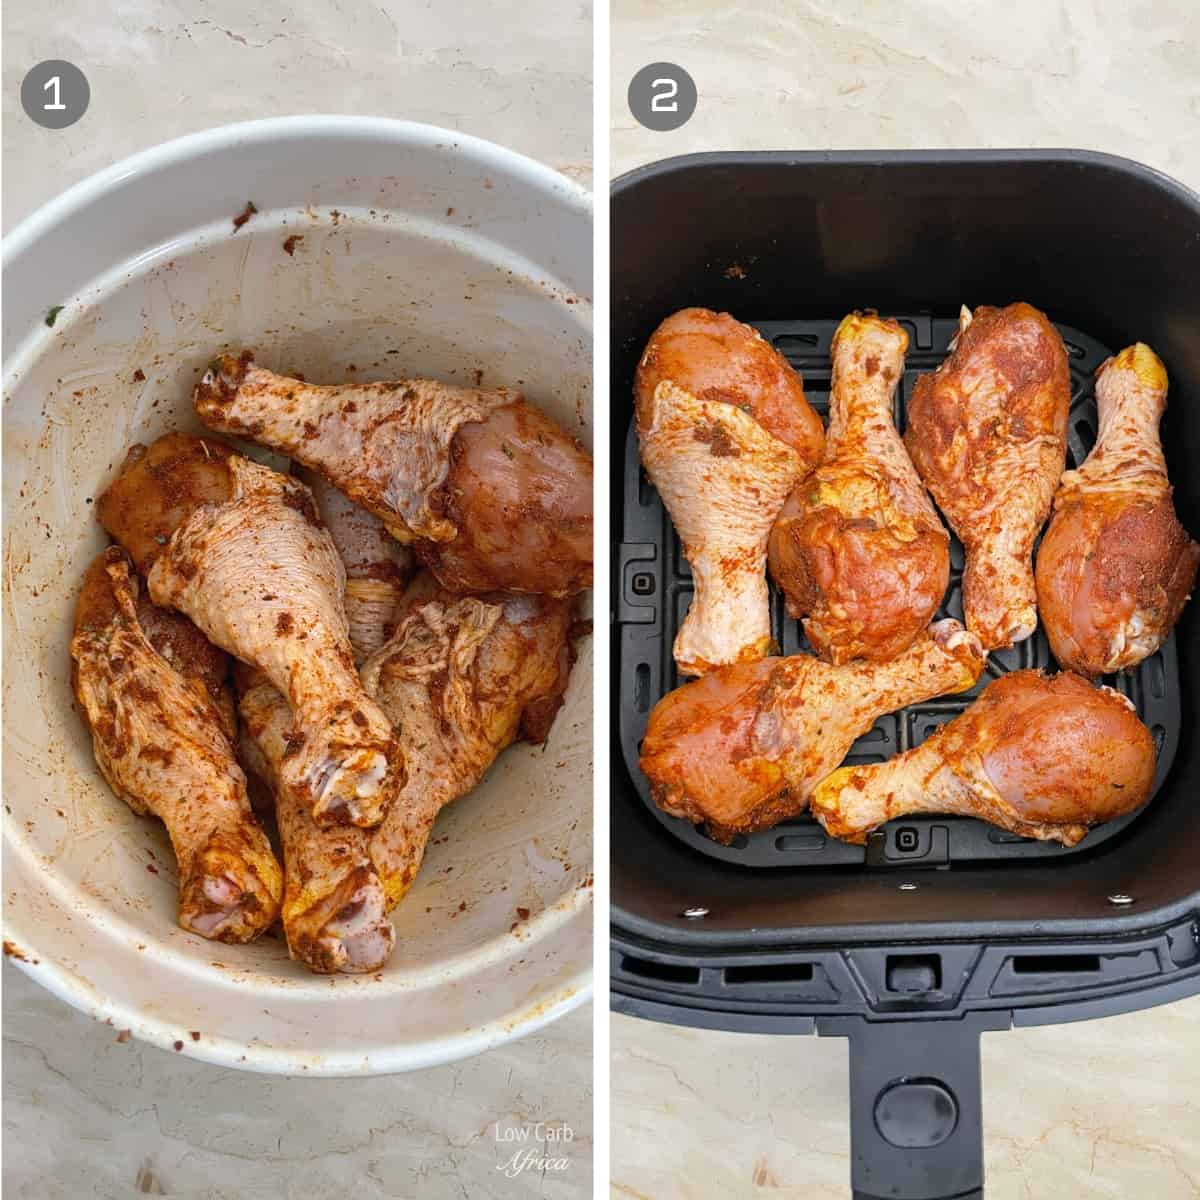 How to make chicken legs in an air fryer.